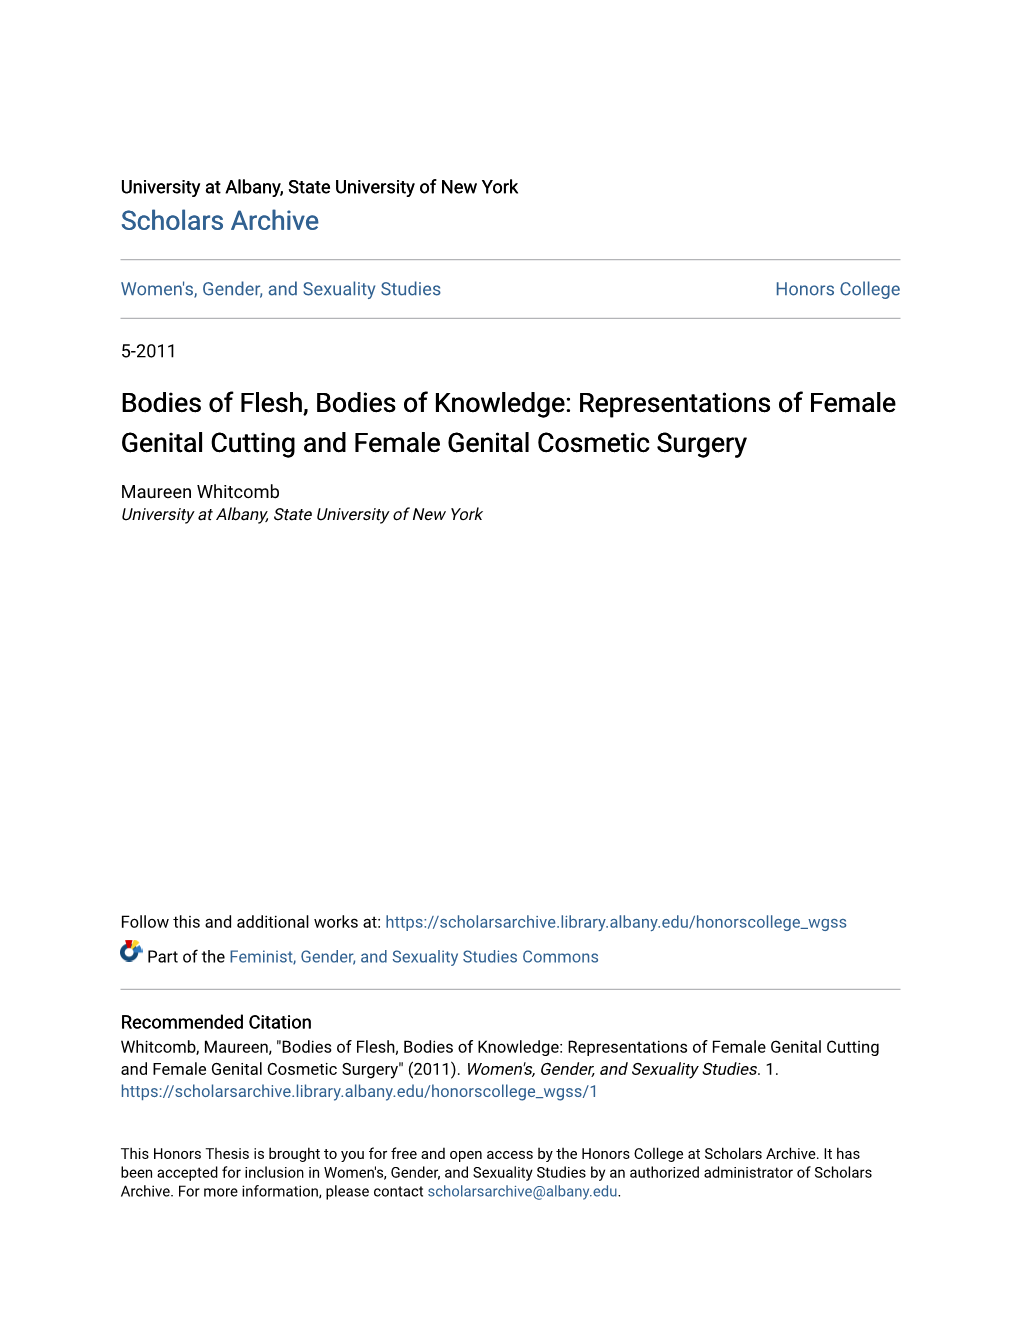 Bodies of Flesh, Bodies of Knowledge: Representations of Female Genital Cutting and Female Genital Cosmetic Surgery